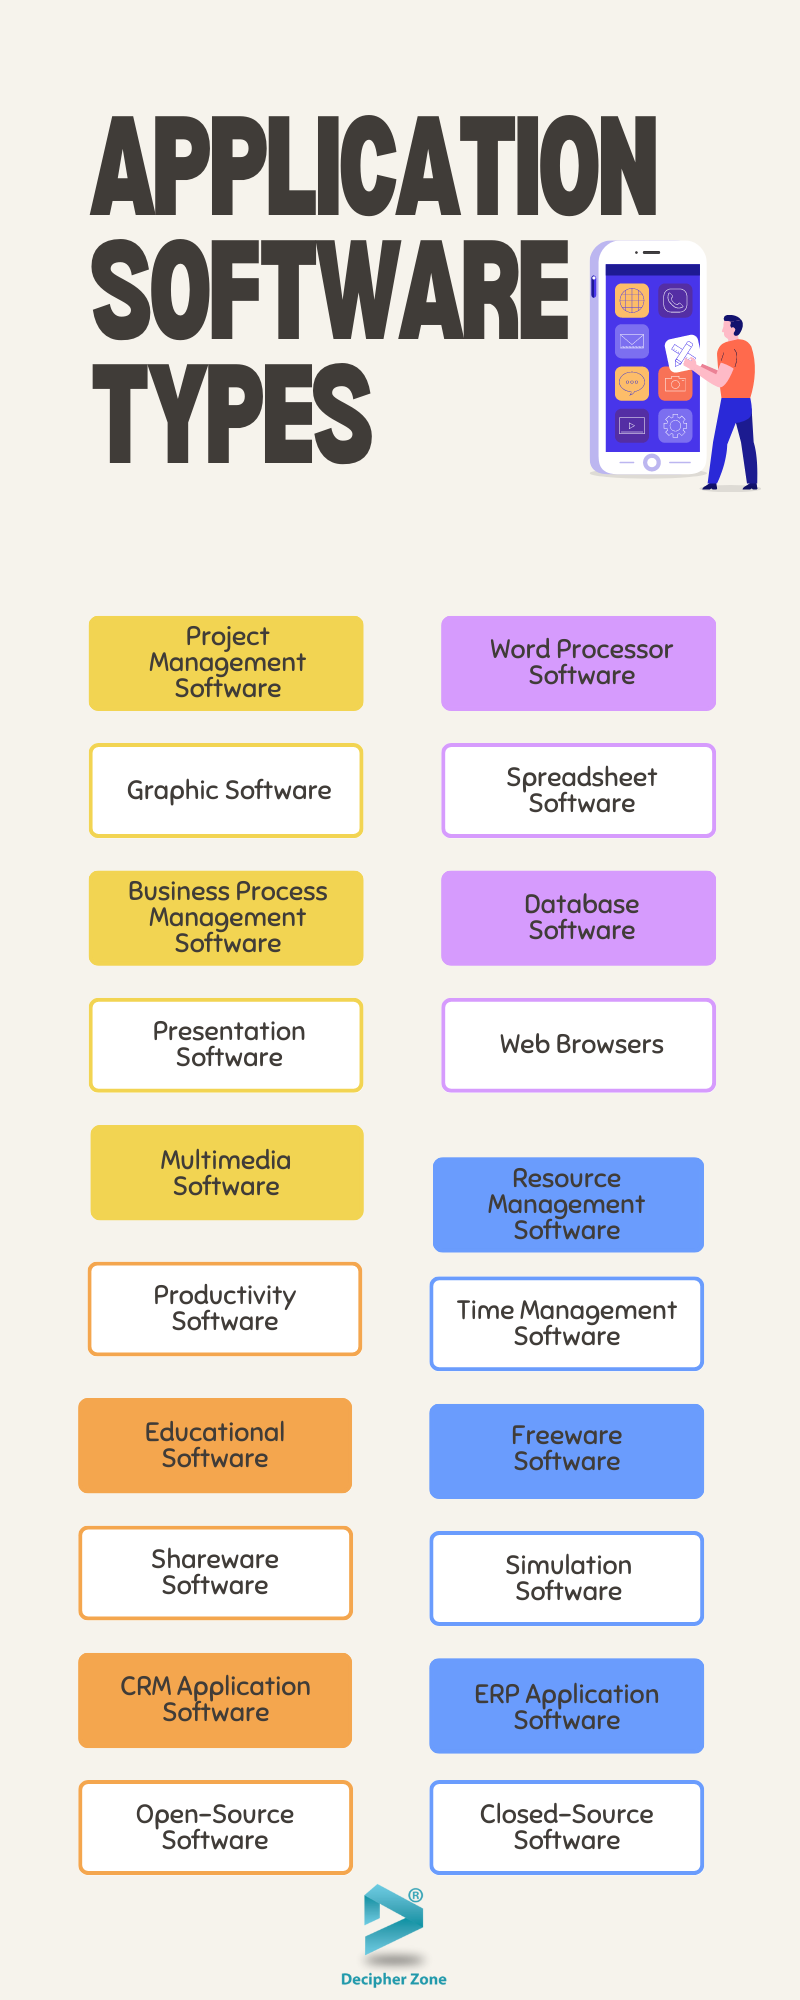 Application Software Types